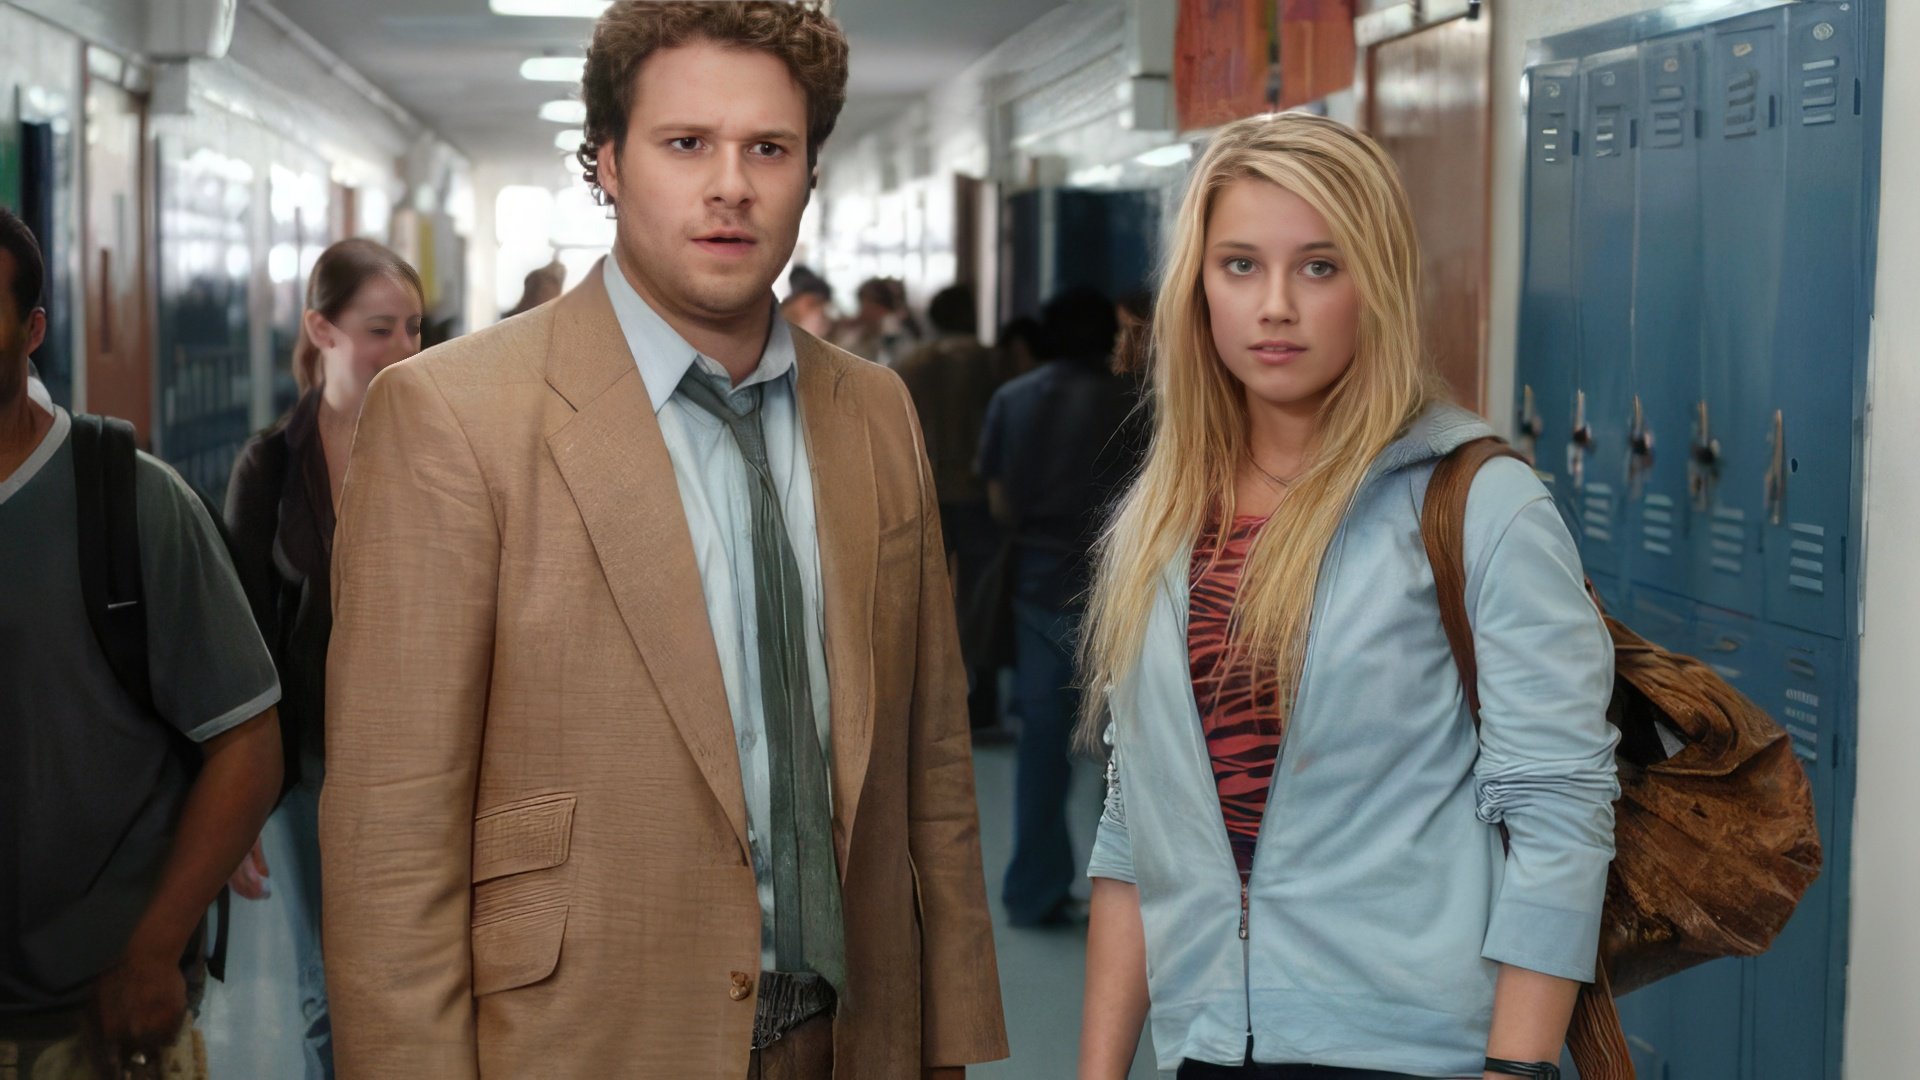 Pineapple Express: Amber Heard and Seth Rogen